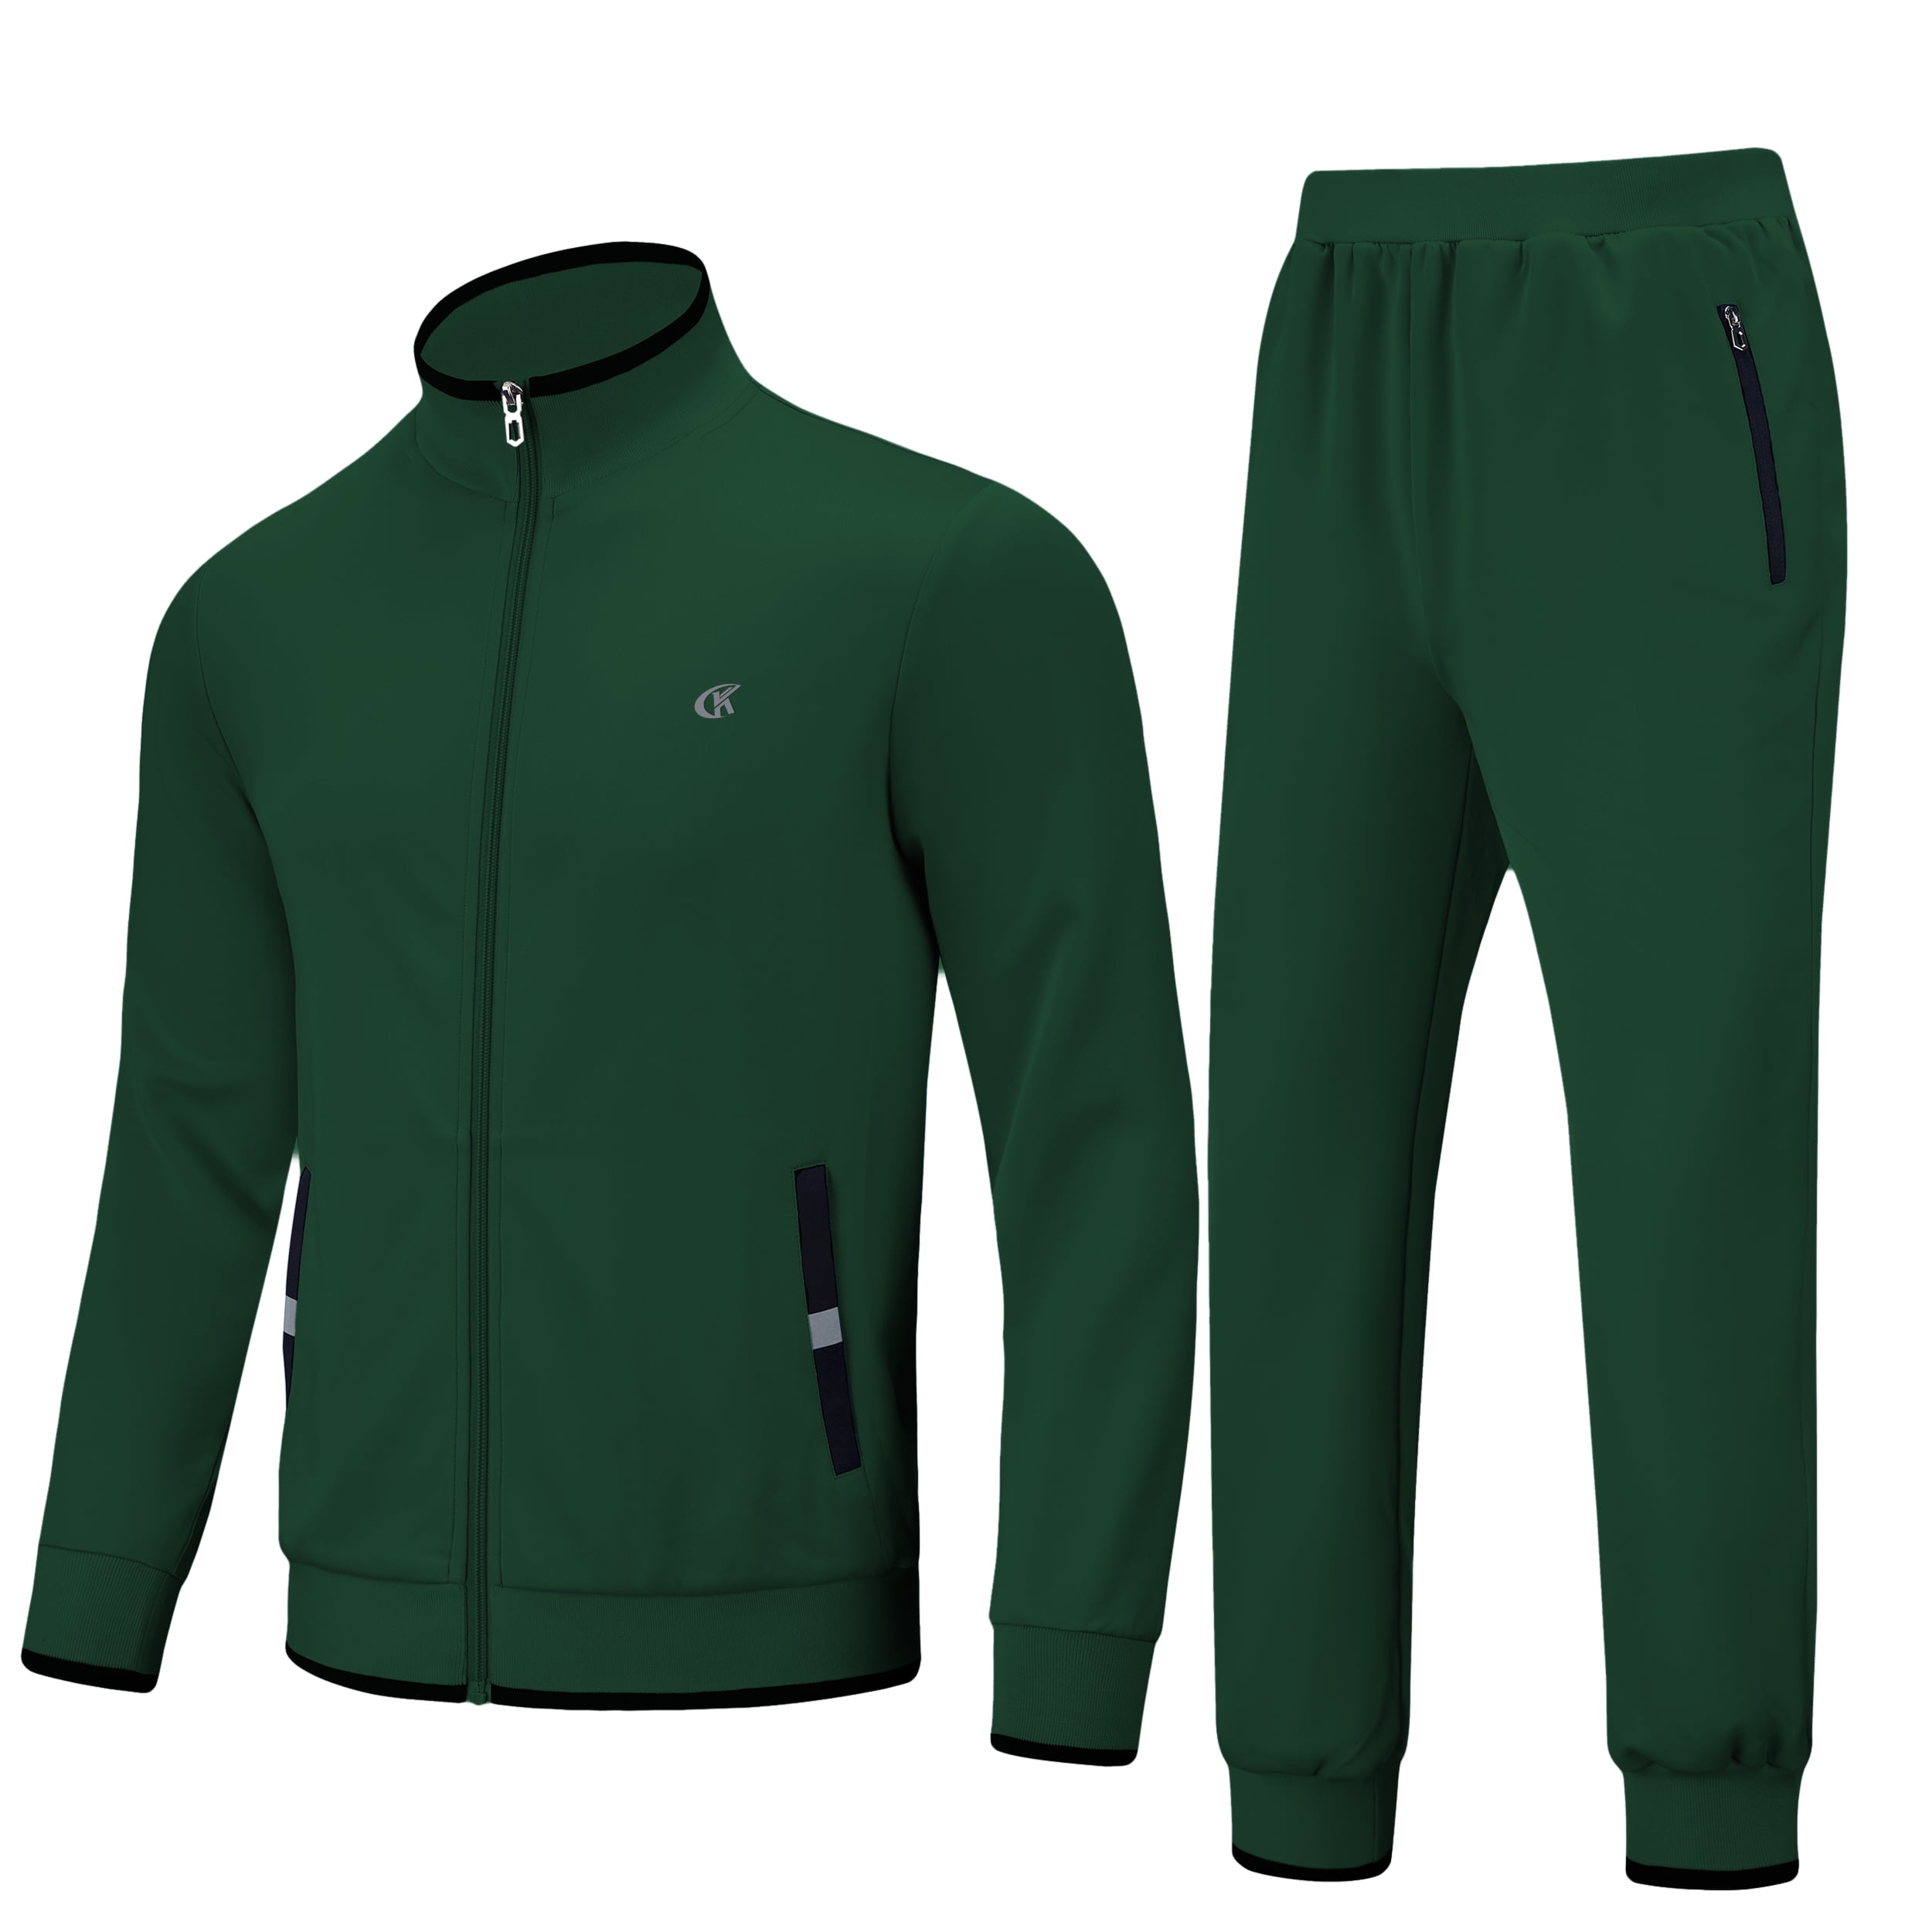 Pdbokew Men's Tracksuits Sweatsuits for Men Set Track Suits 2 Piece ...